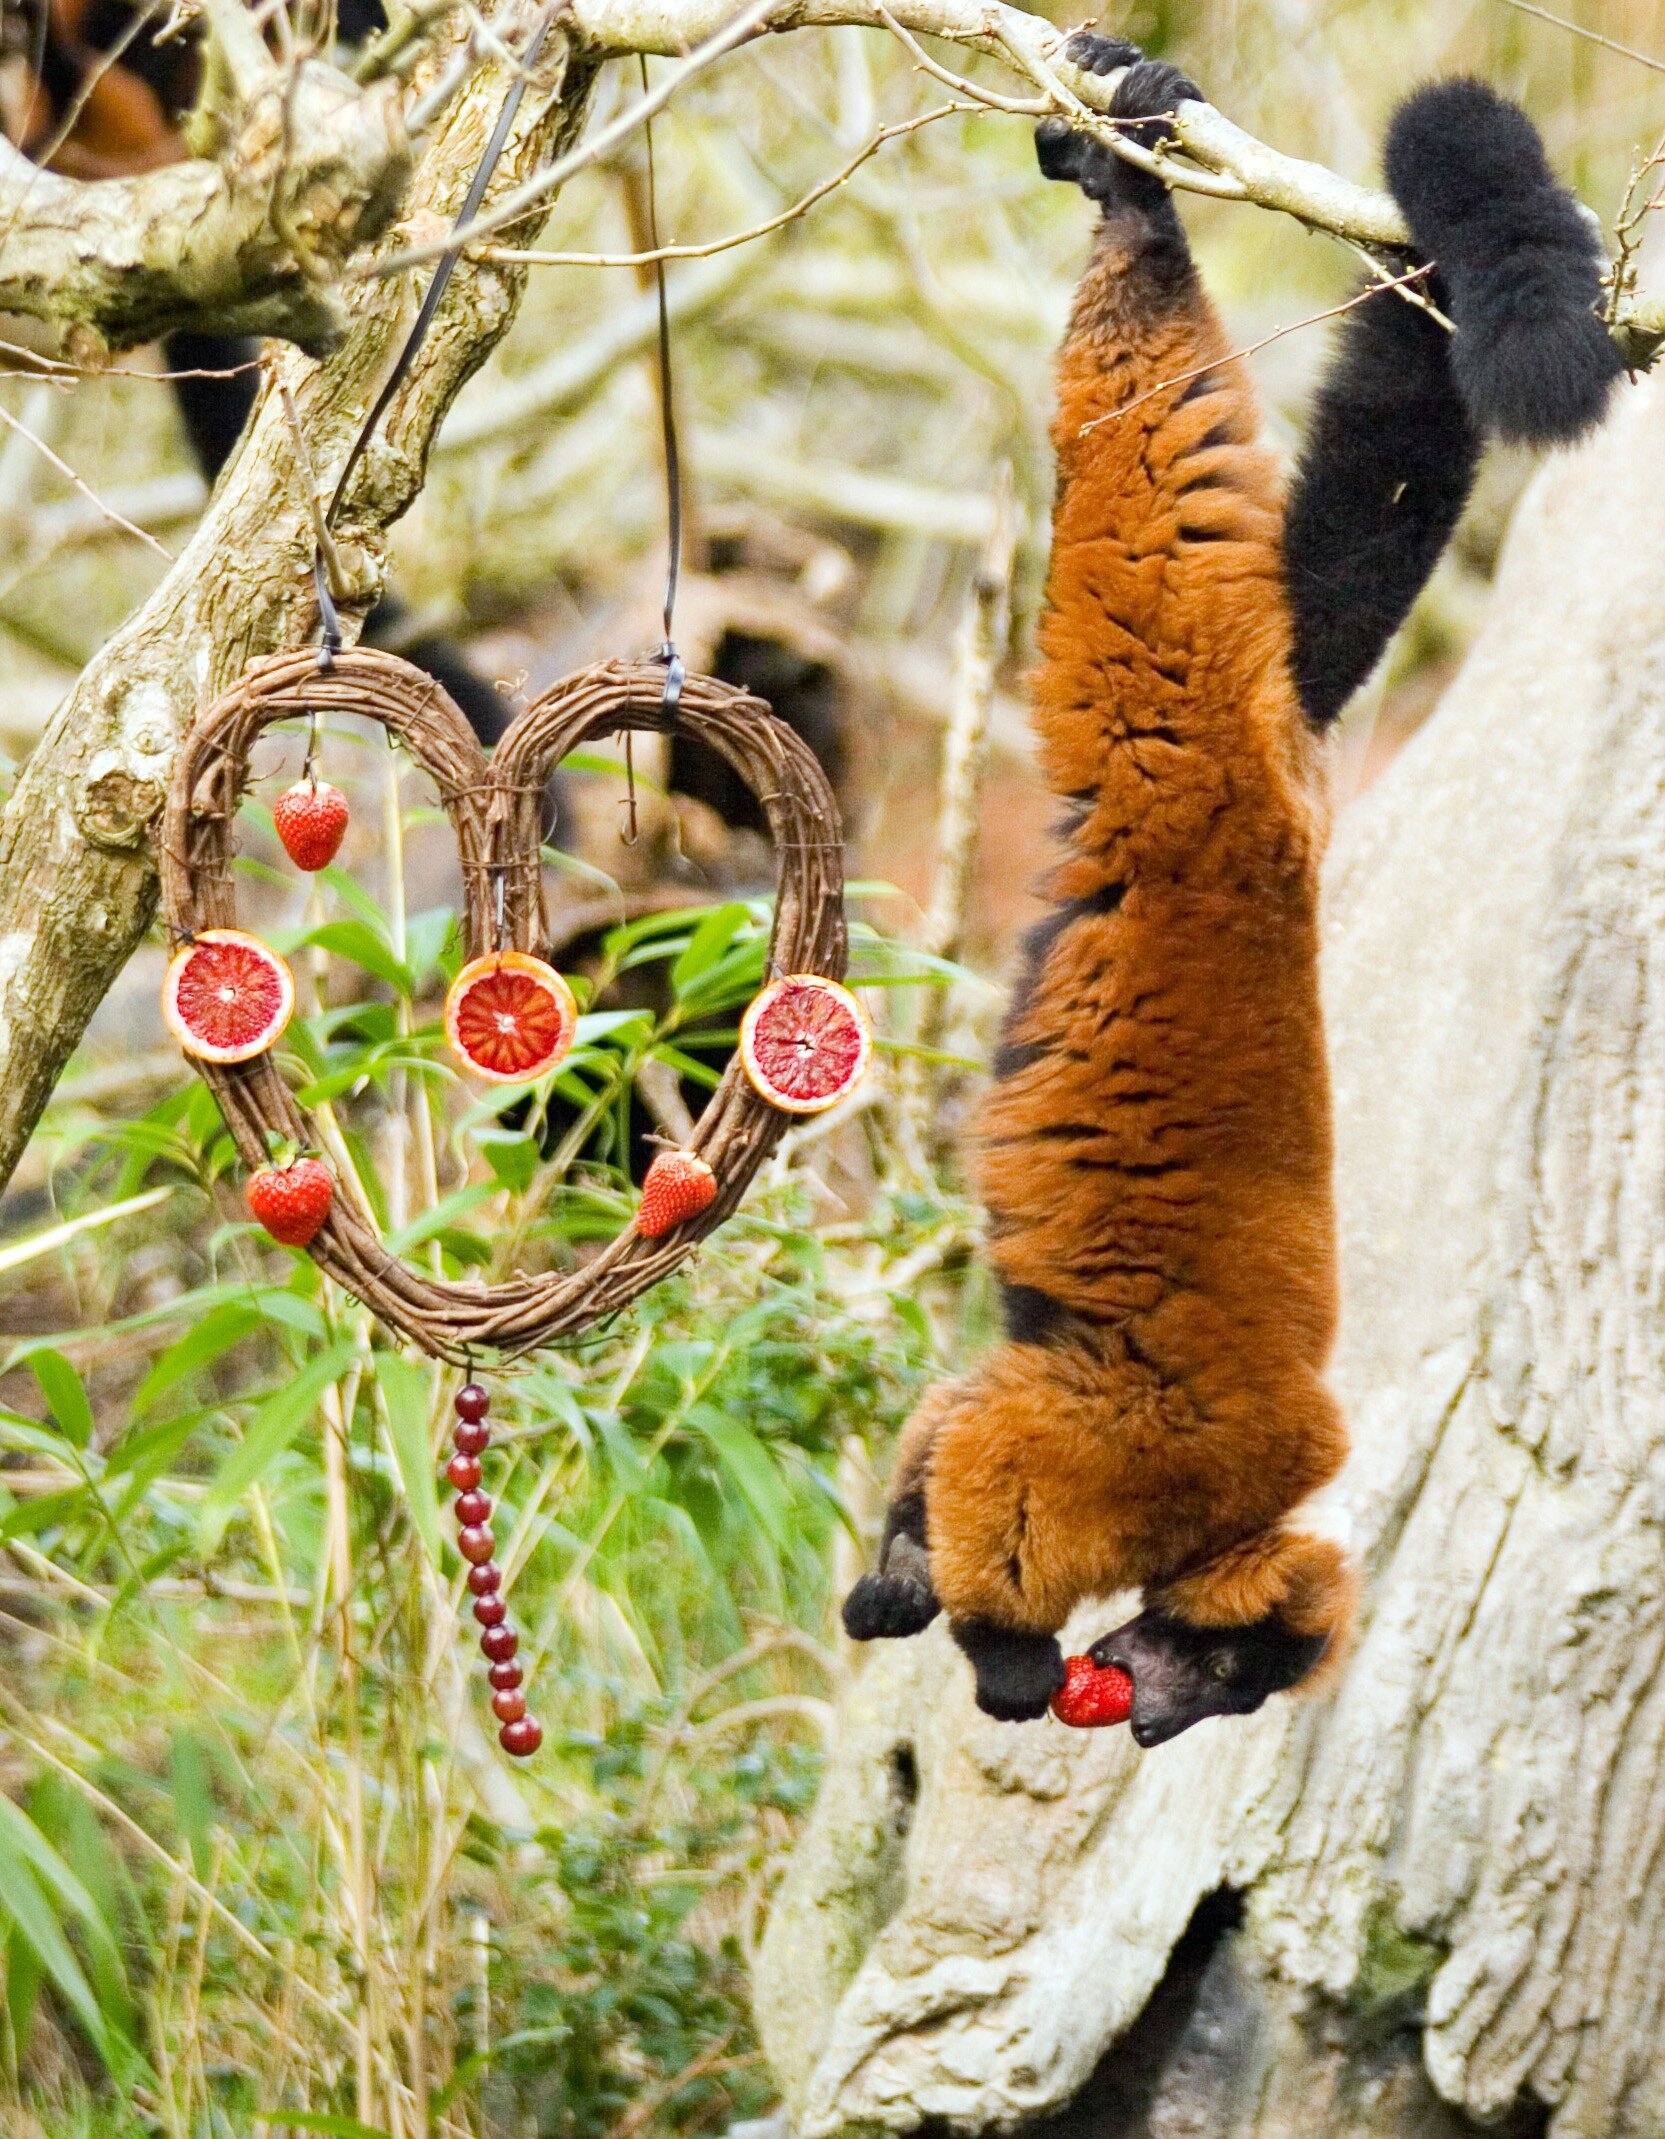 On Sat Feb. 11 10am-3pm, animals at Woodland Park Zoo will receive divine Valentine’s Day treats such as herbal bouquets, heart-shaped steaks, and more. Here's a red ruffed lemur indulging in a heart-shaped grapevine wreath. Photo credit Mat Hayward/Woodland Park Zoo